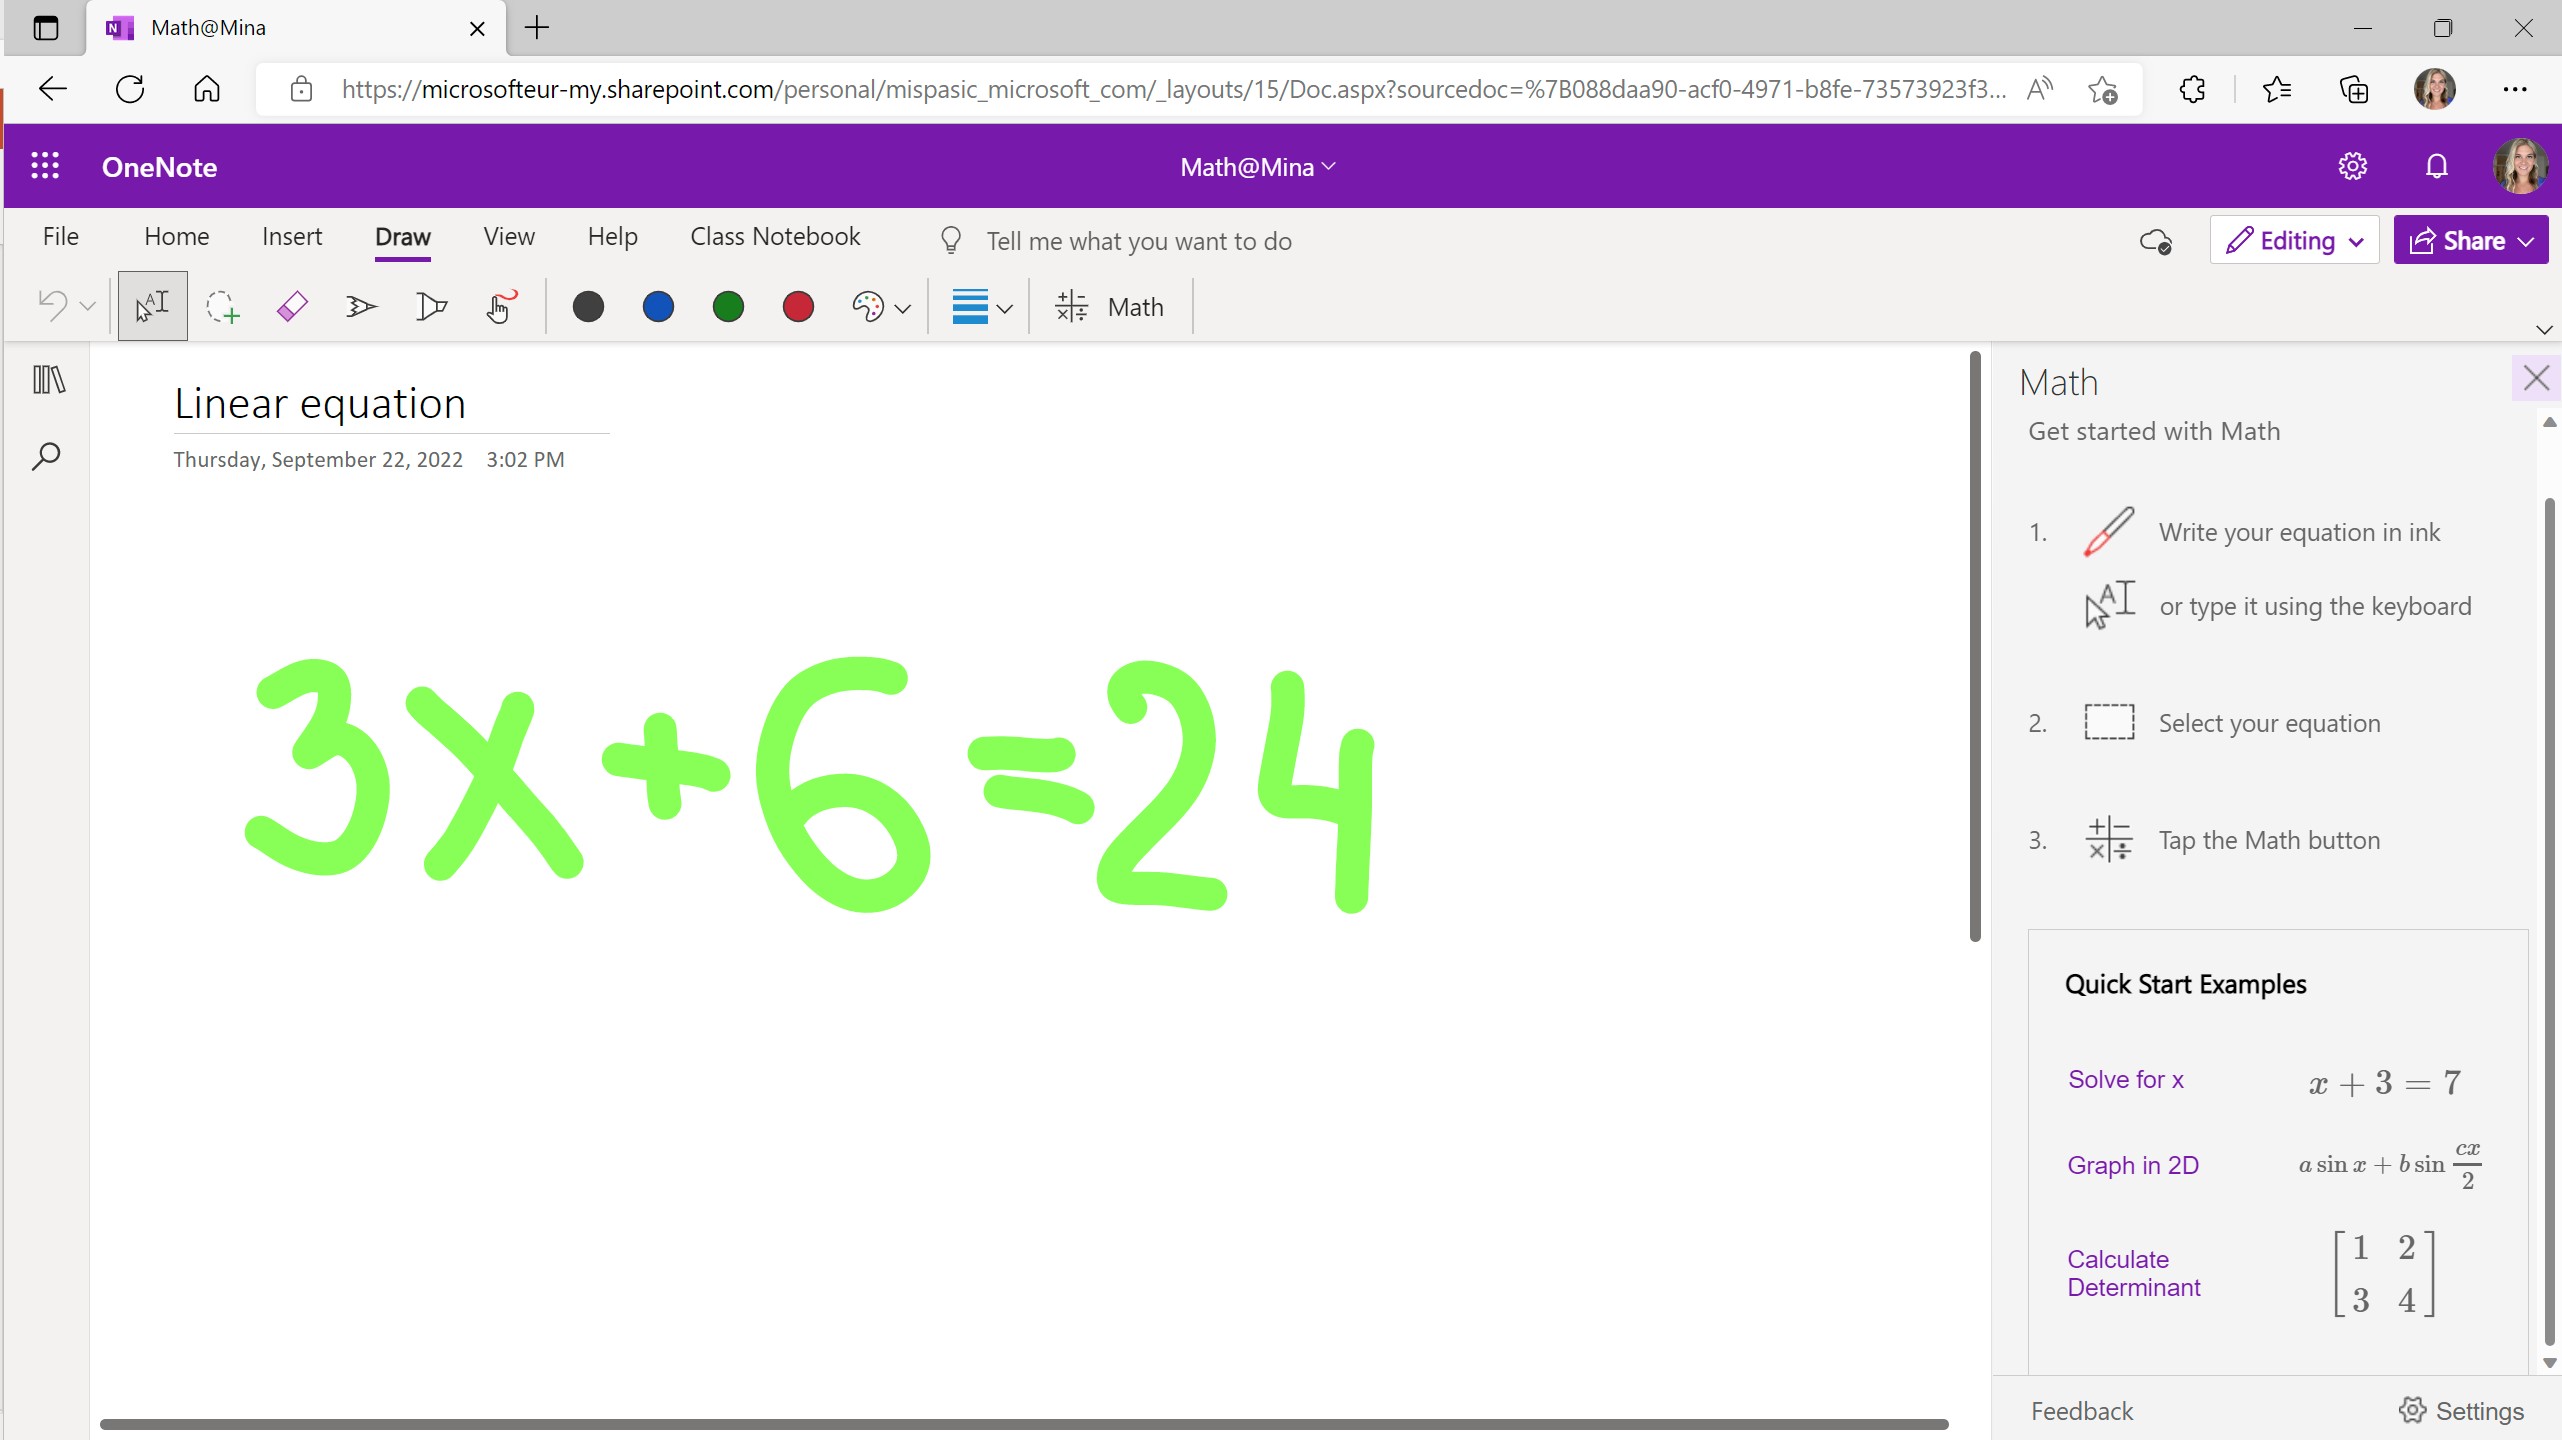 Math Assistant in OneNote showing a how to start the process for solving a linear equation.